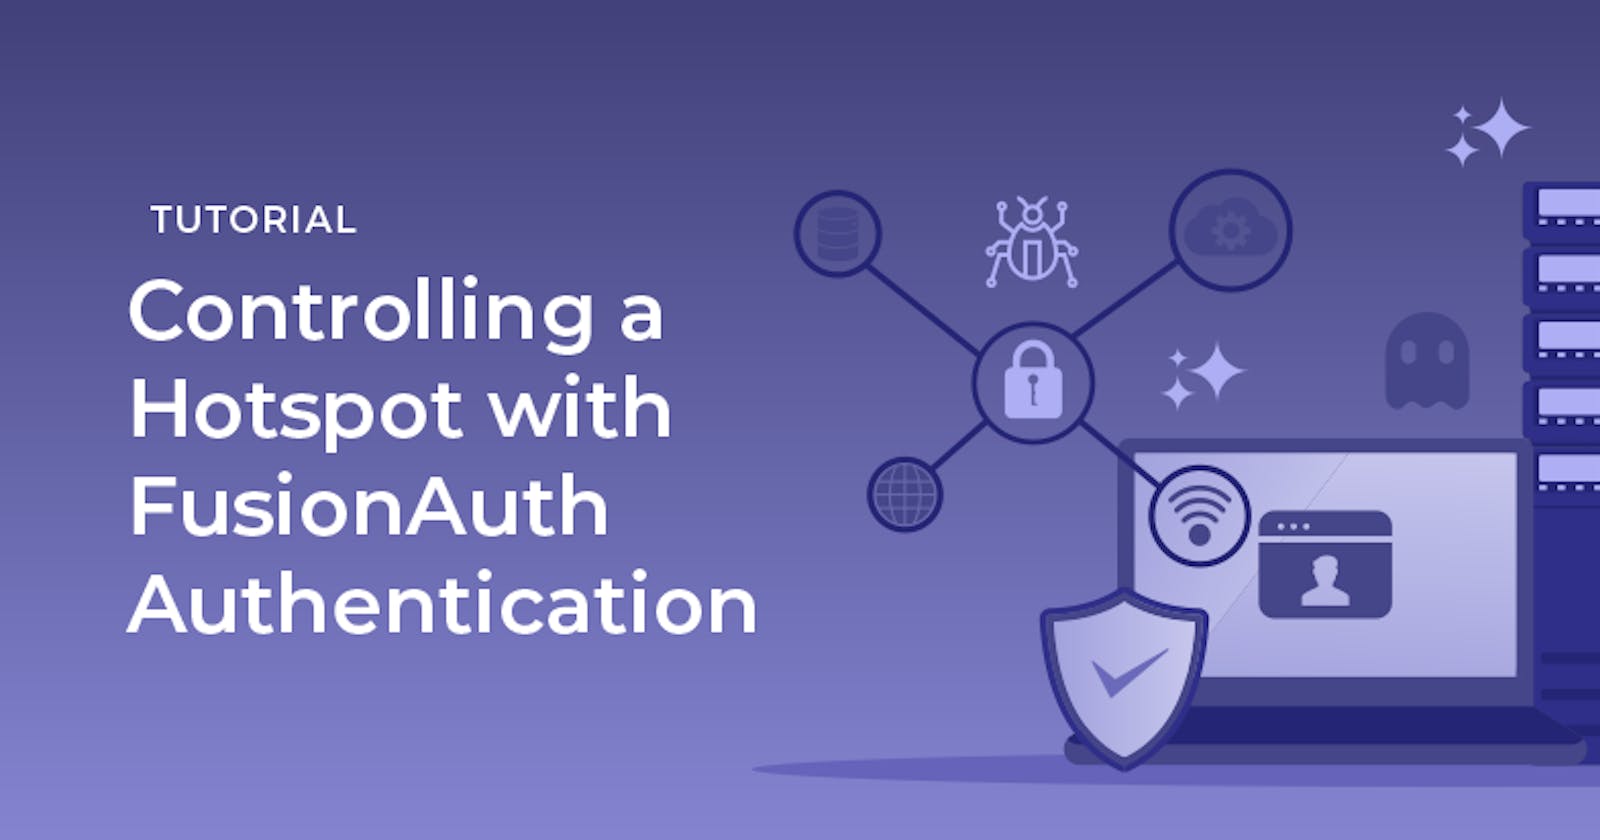 Controlling a hotspot with FusionAuth authentication